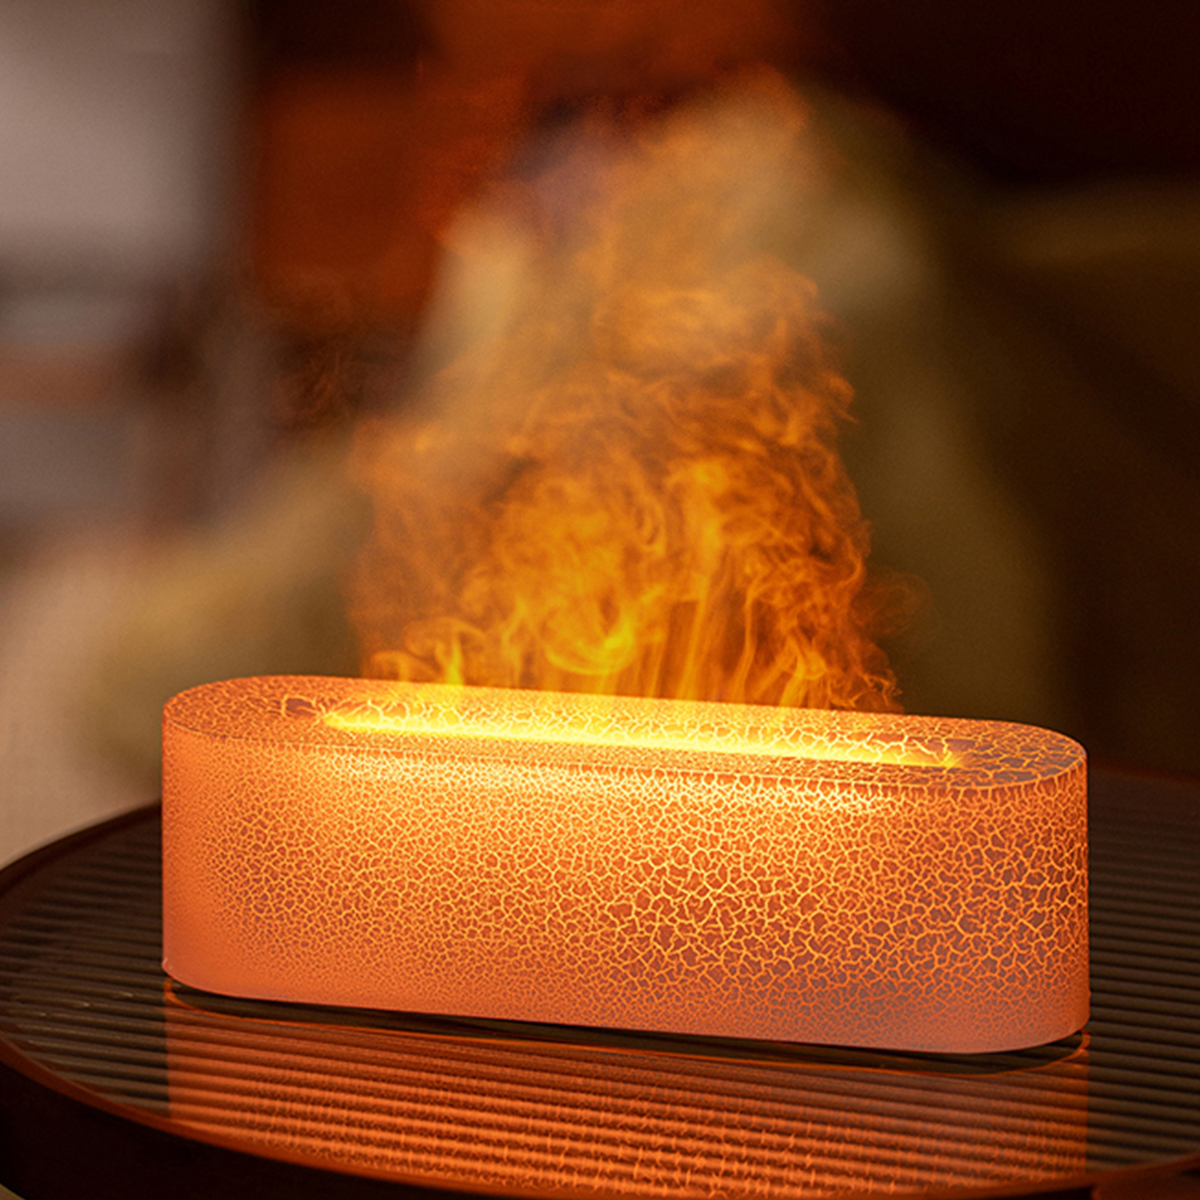 Why Choose Our Unique Flame Crackle Aroma Diffuser for Your Shop Needs?